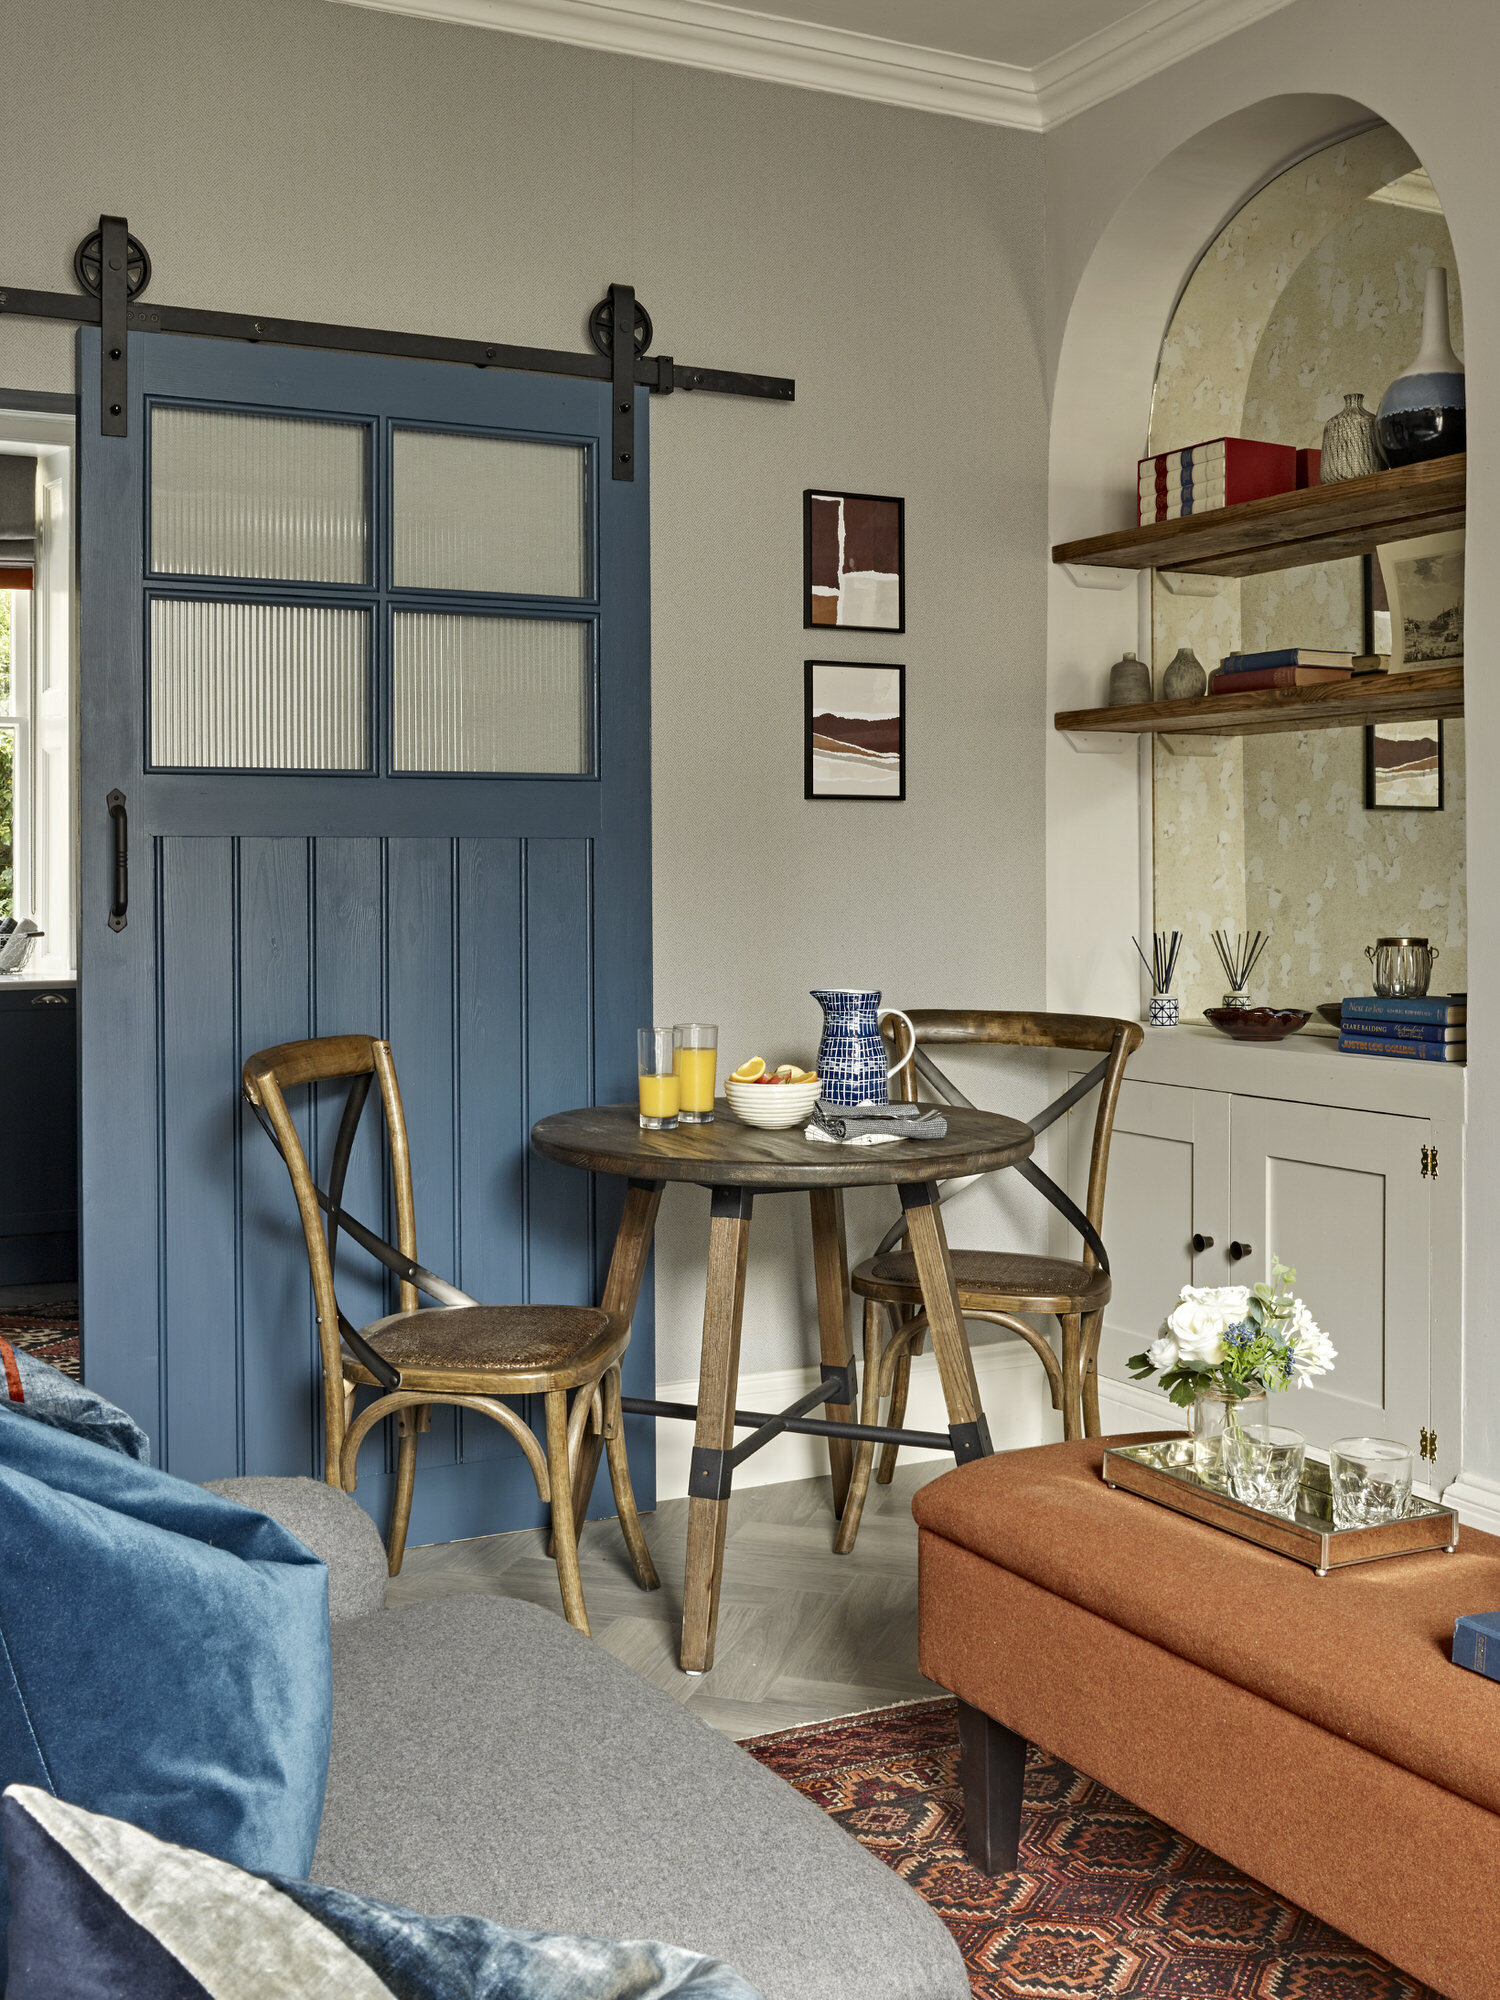 Dining area with wooden table and navy barn door